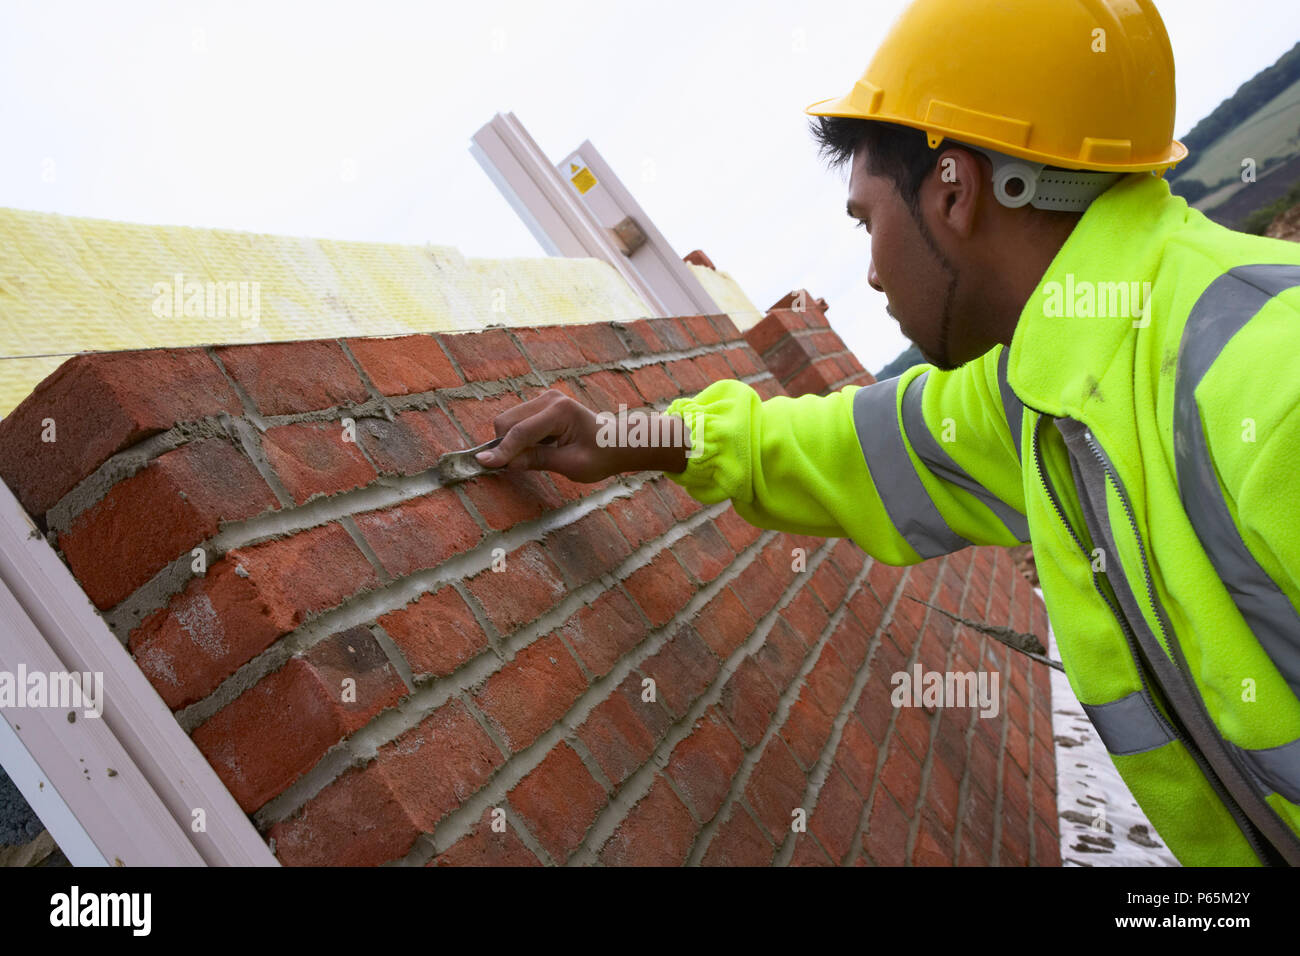 Bricklayer smoothing mortar on a newly erected brickwall. House building site, England, UK. Stock Photo